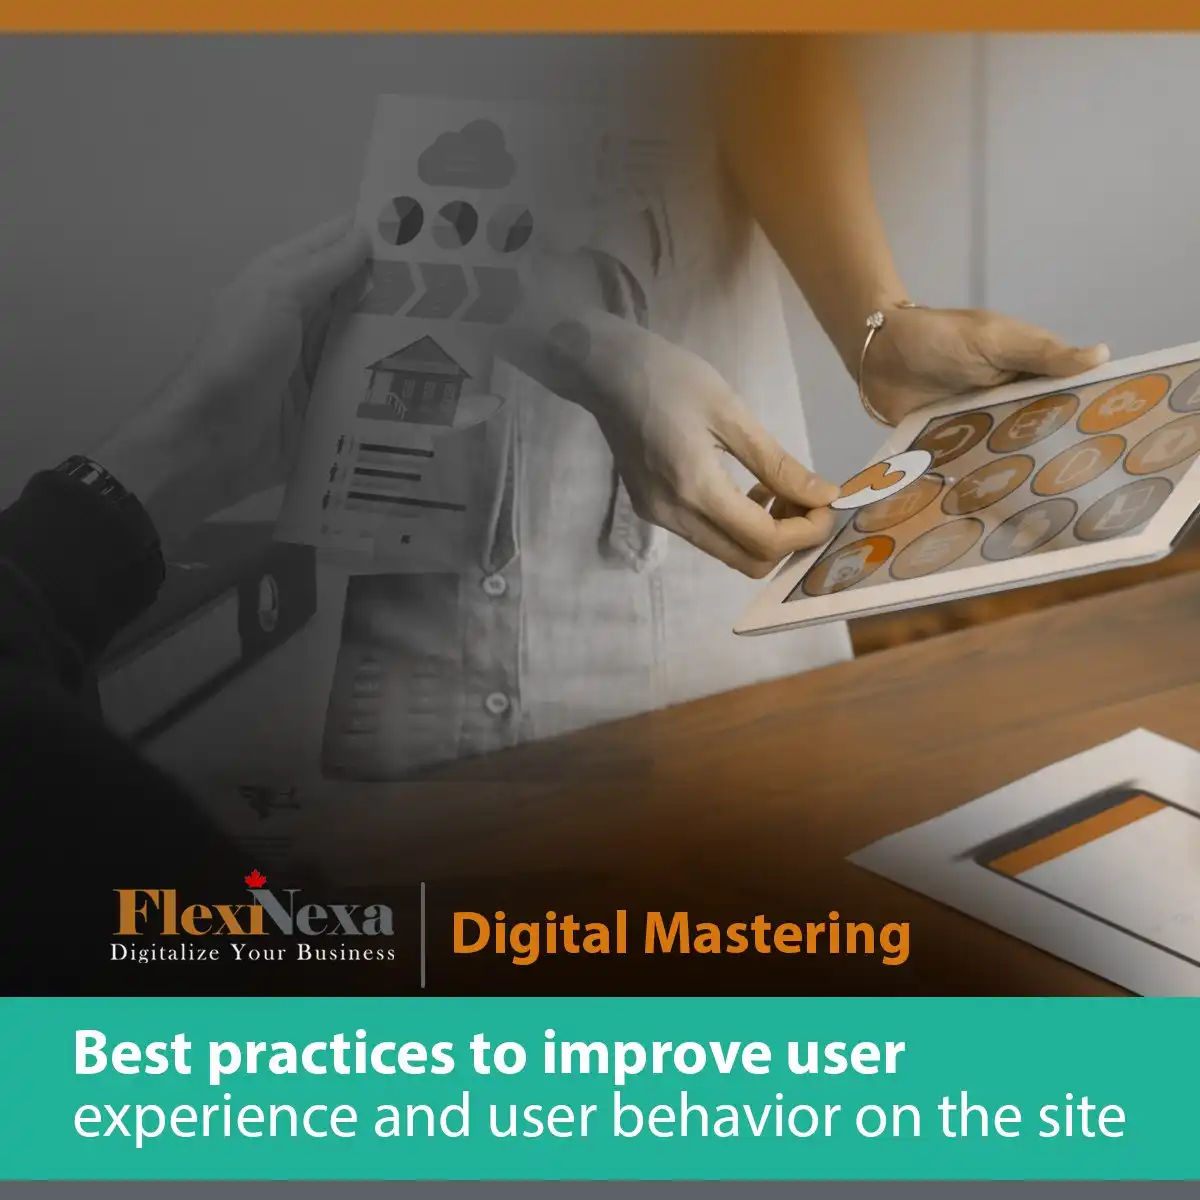 Best practices to improve user experience and user behavior on the site